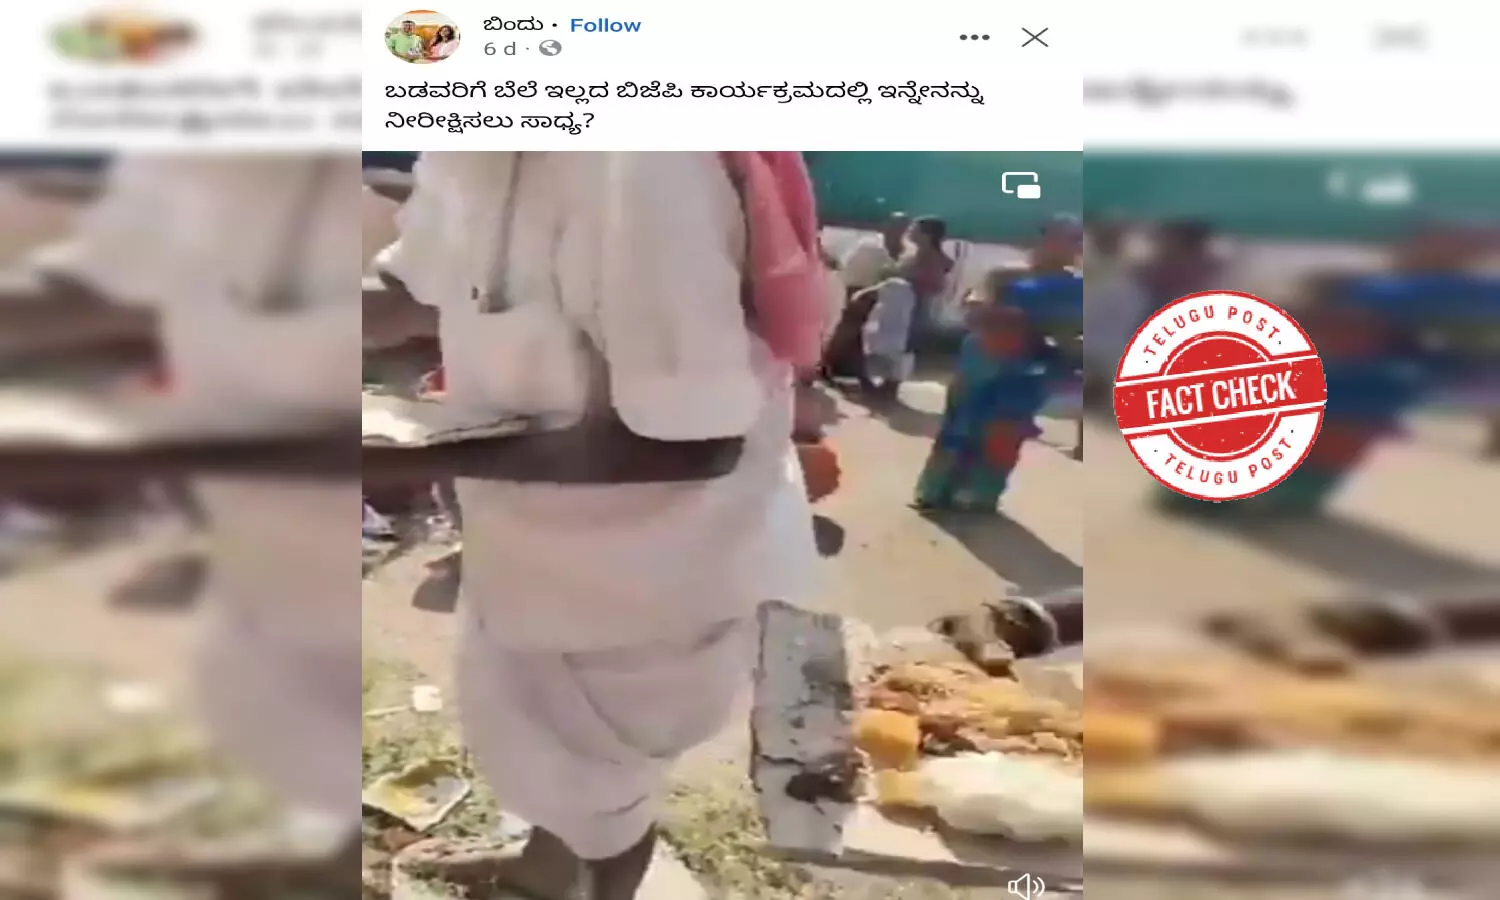 Fact Check: Video of poor eating on carton straps is from a TRS party meet, not BJP